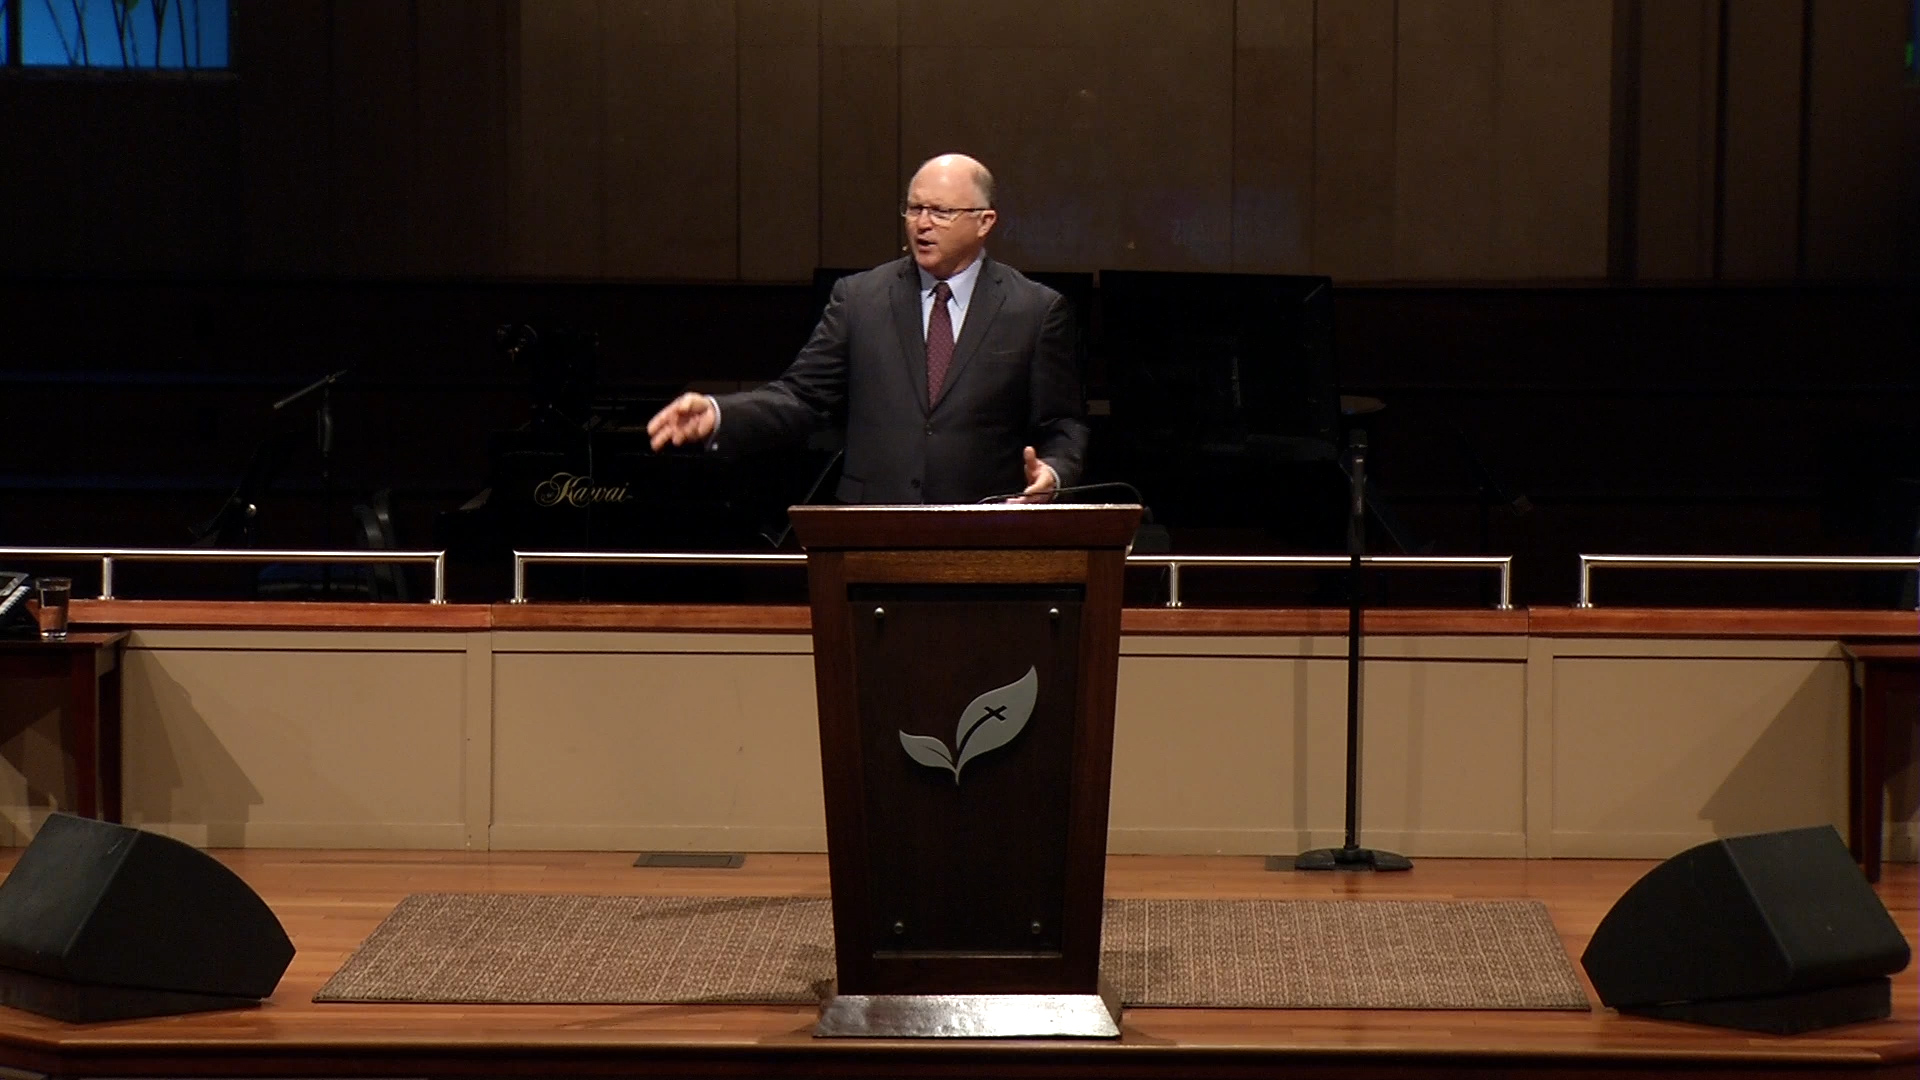 Pastor Paul Chappell: Jesus Is Our Supply